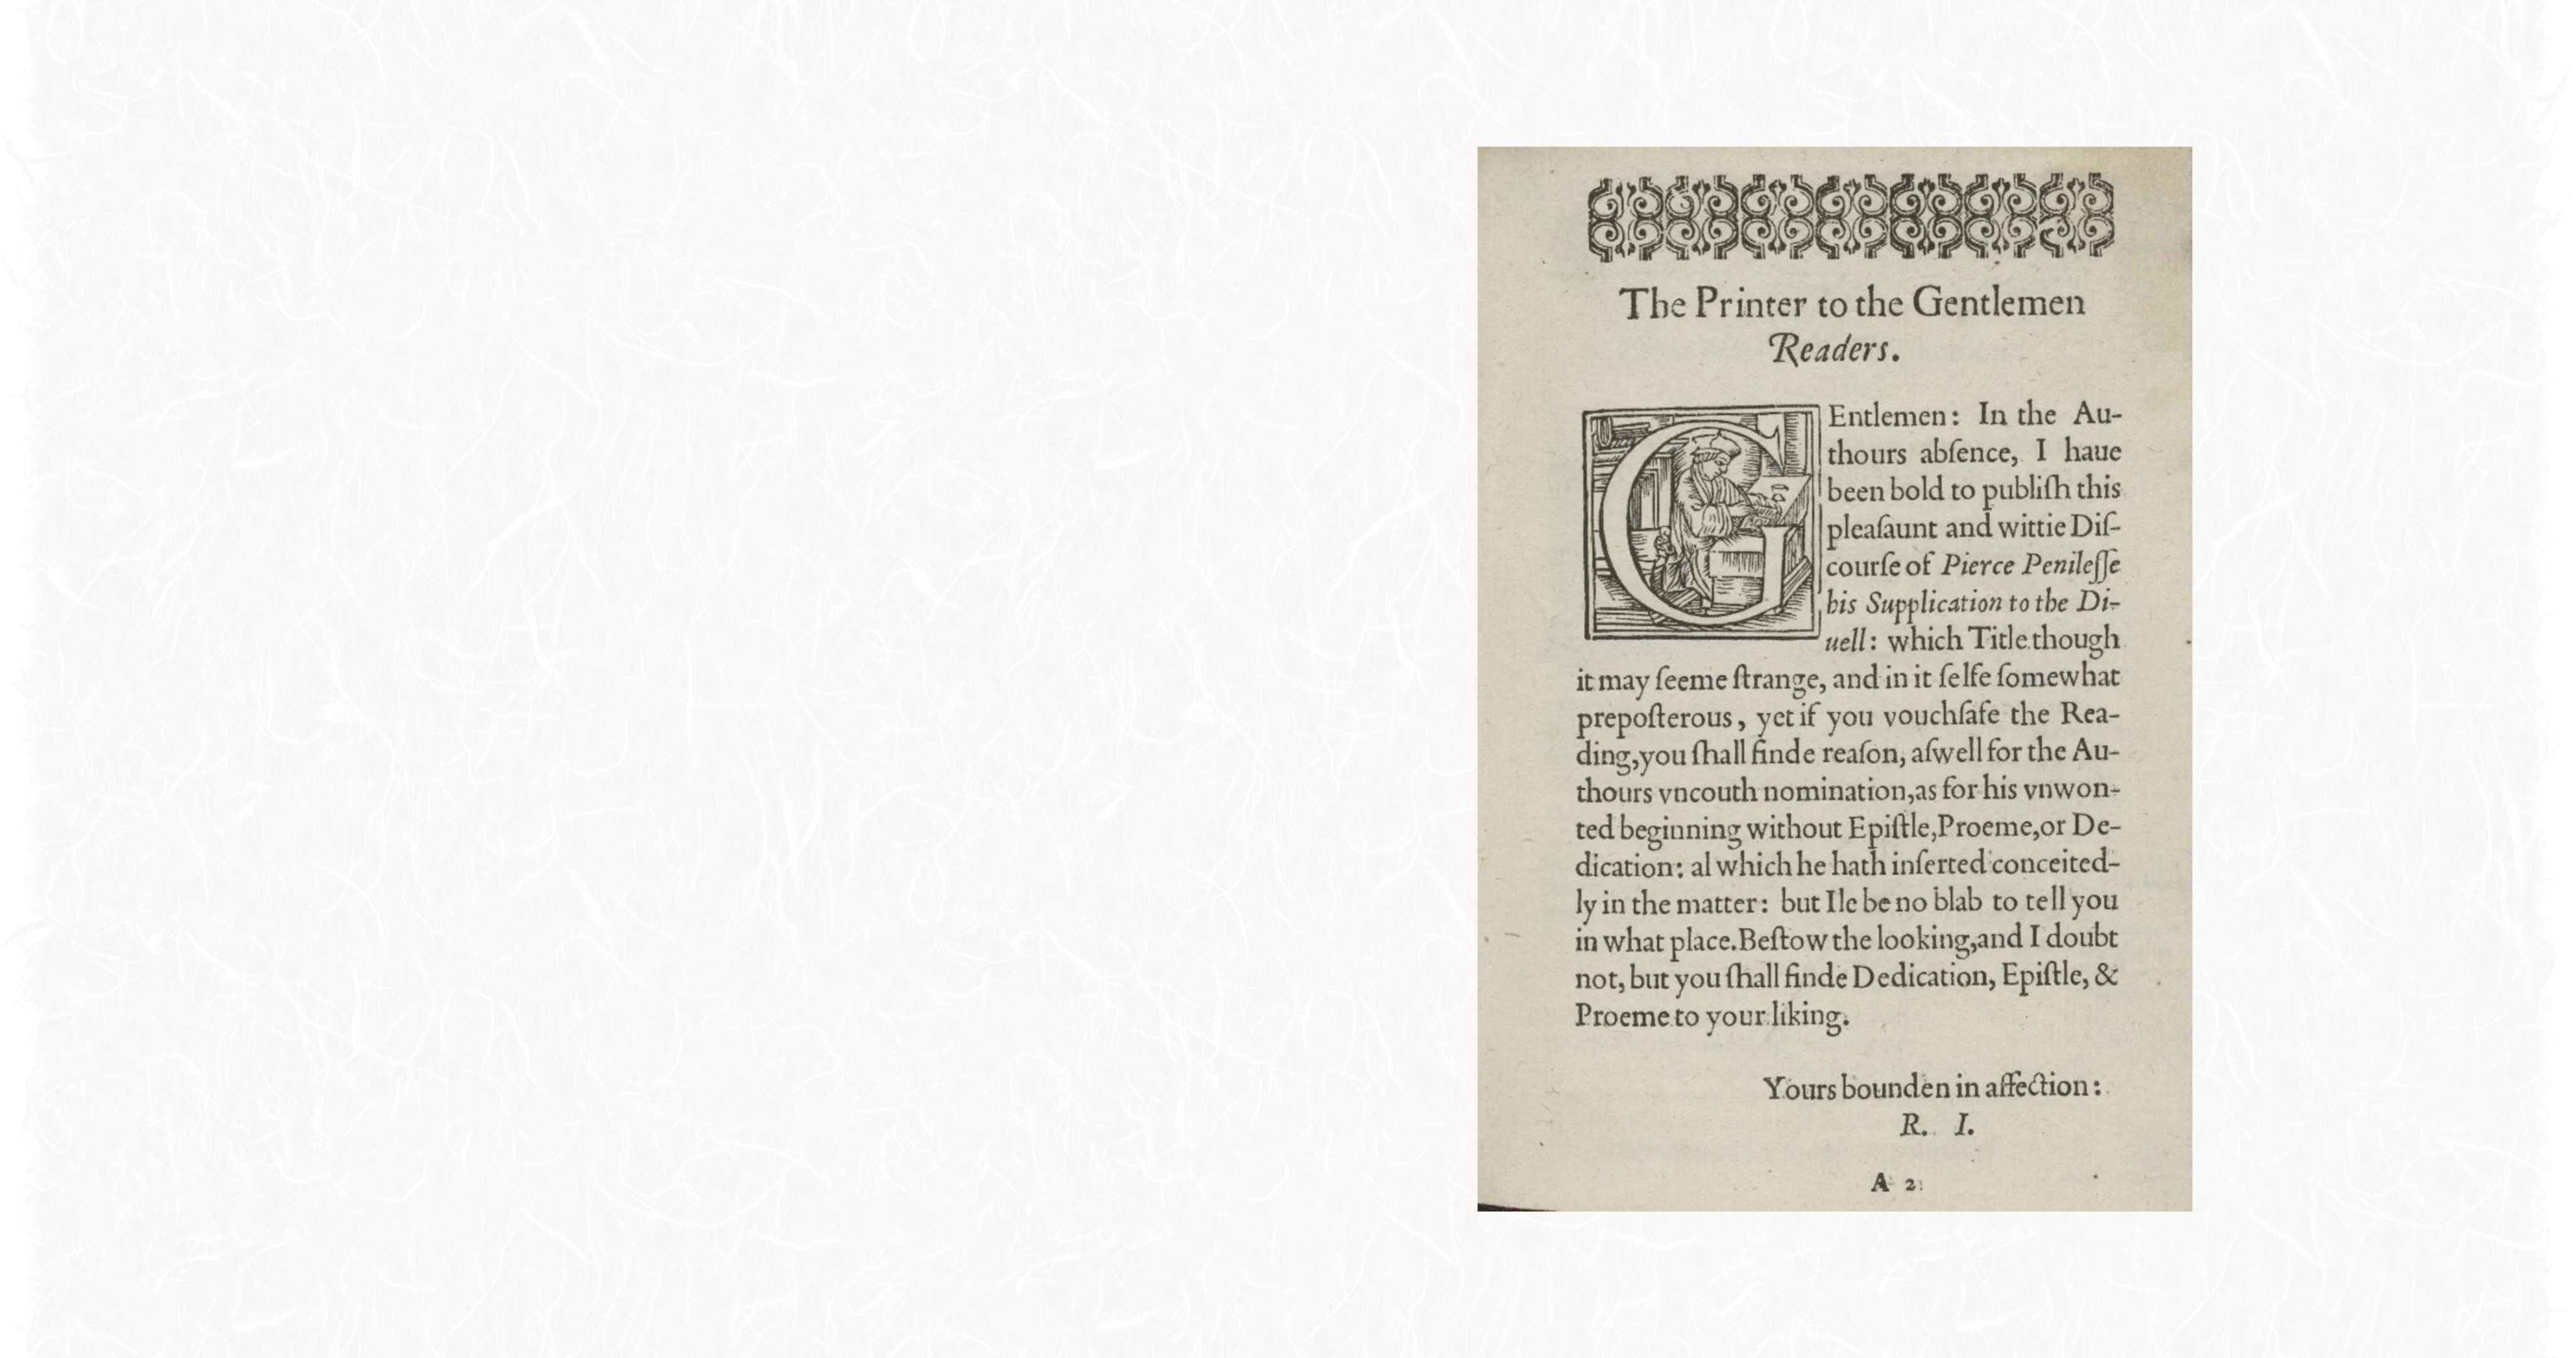 Digitised scan of a printer's letter to the read from Nashe's first edition of 'Pierce Penilesse'